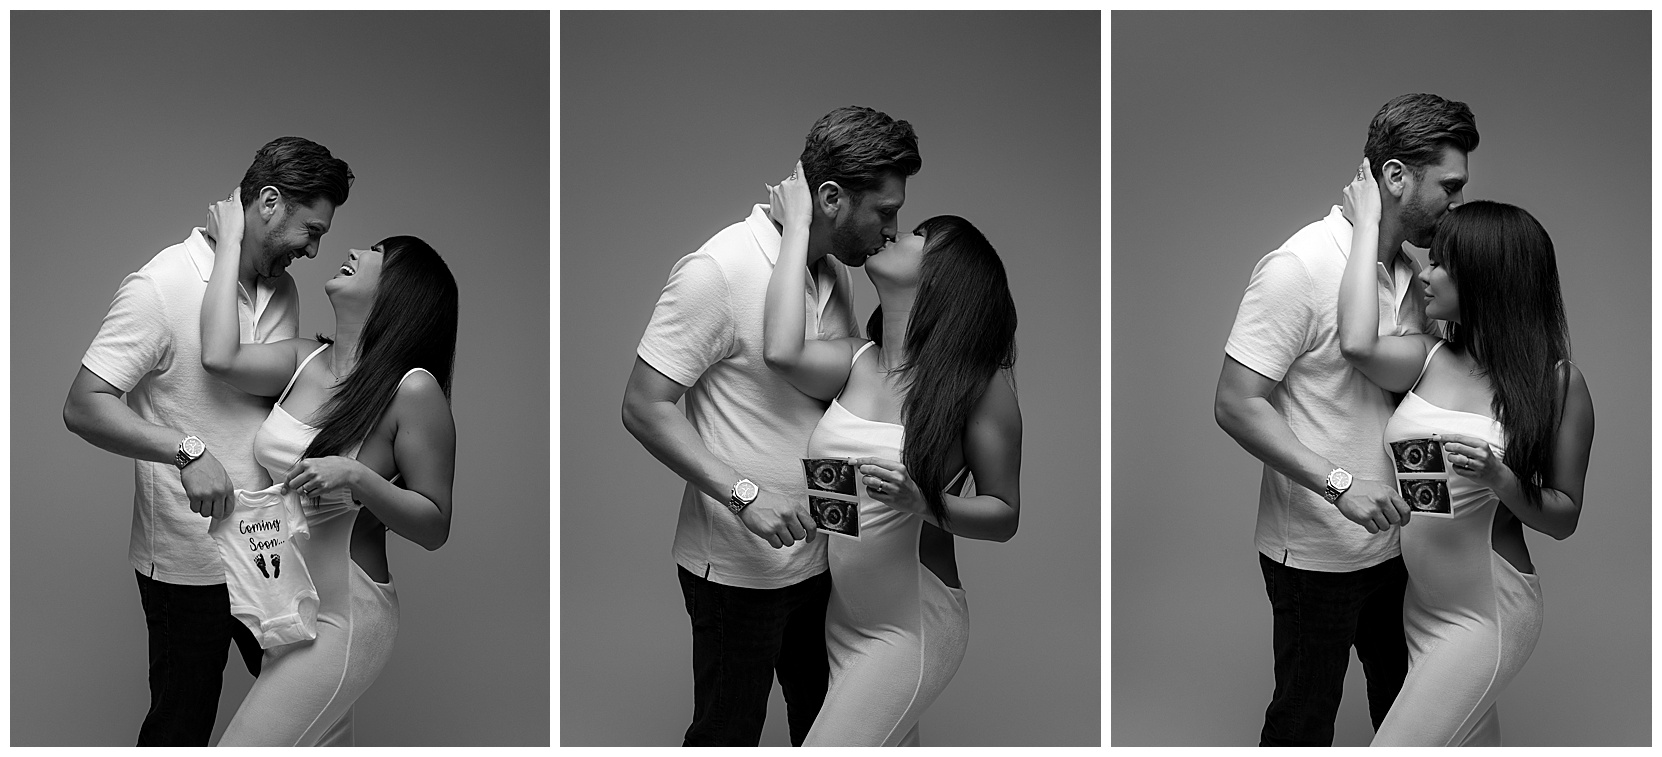 Set of three black and white pregnancy announcement photos featuring a man and a woman kissing and holding each other showing off a onesie and an ultrasound photo